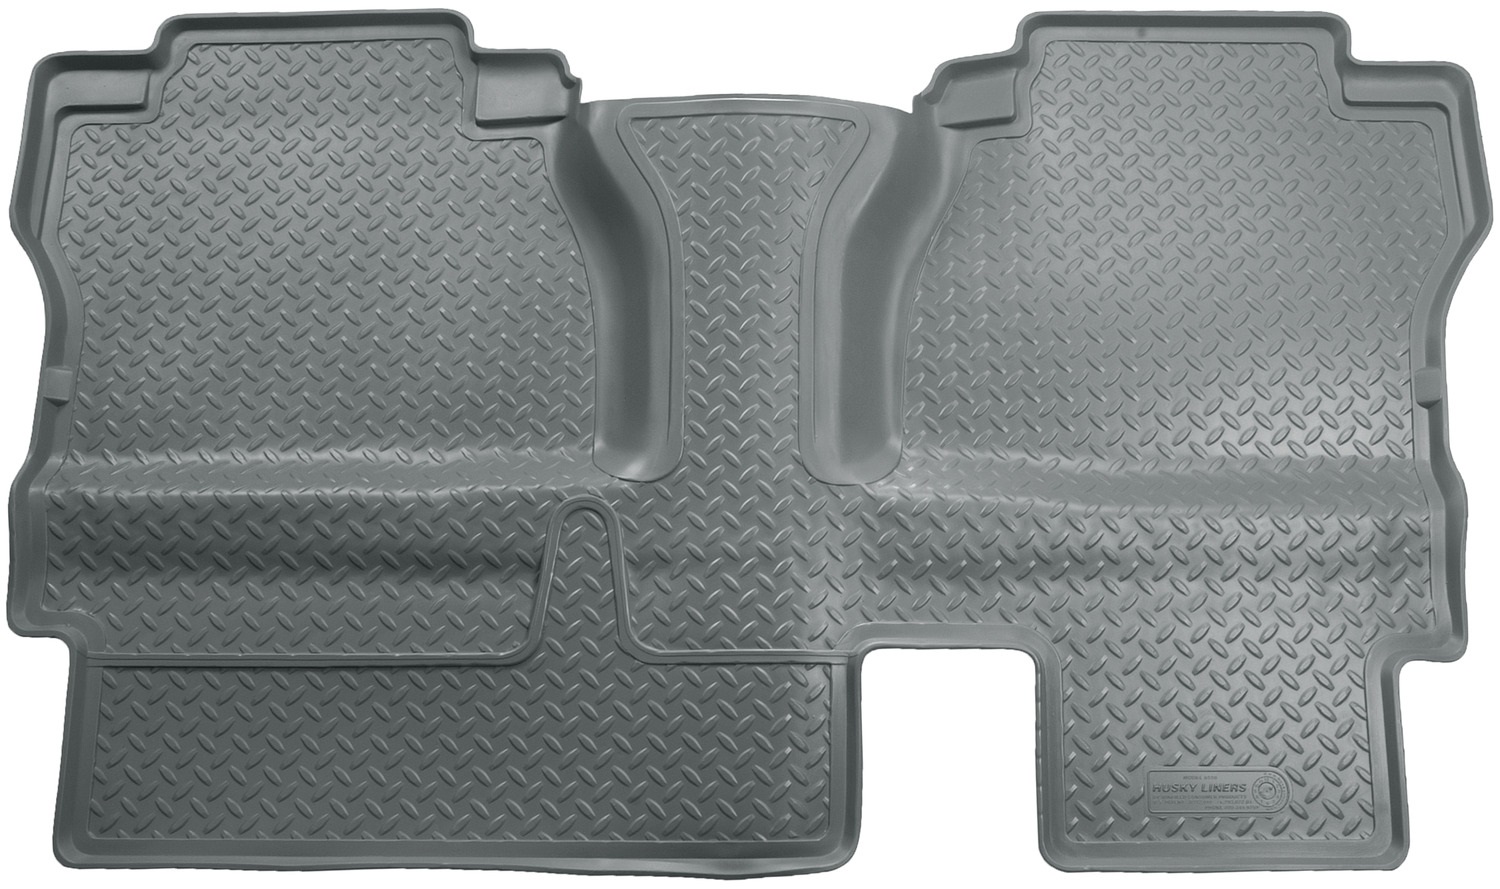 Husky Liners Husky Liners 65582 Classic Style; Floor Liner Fits 07-13 Tundra